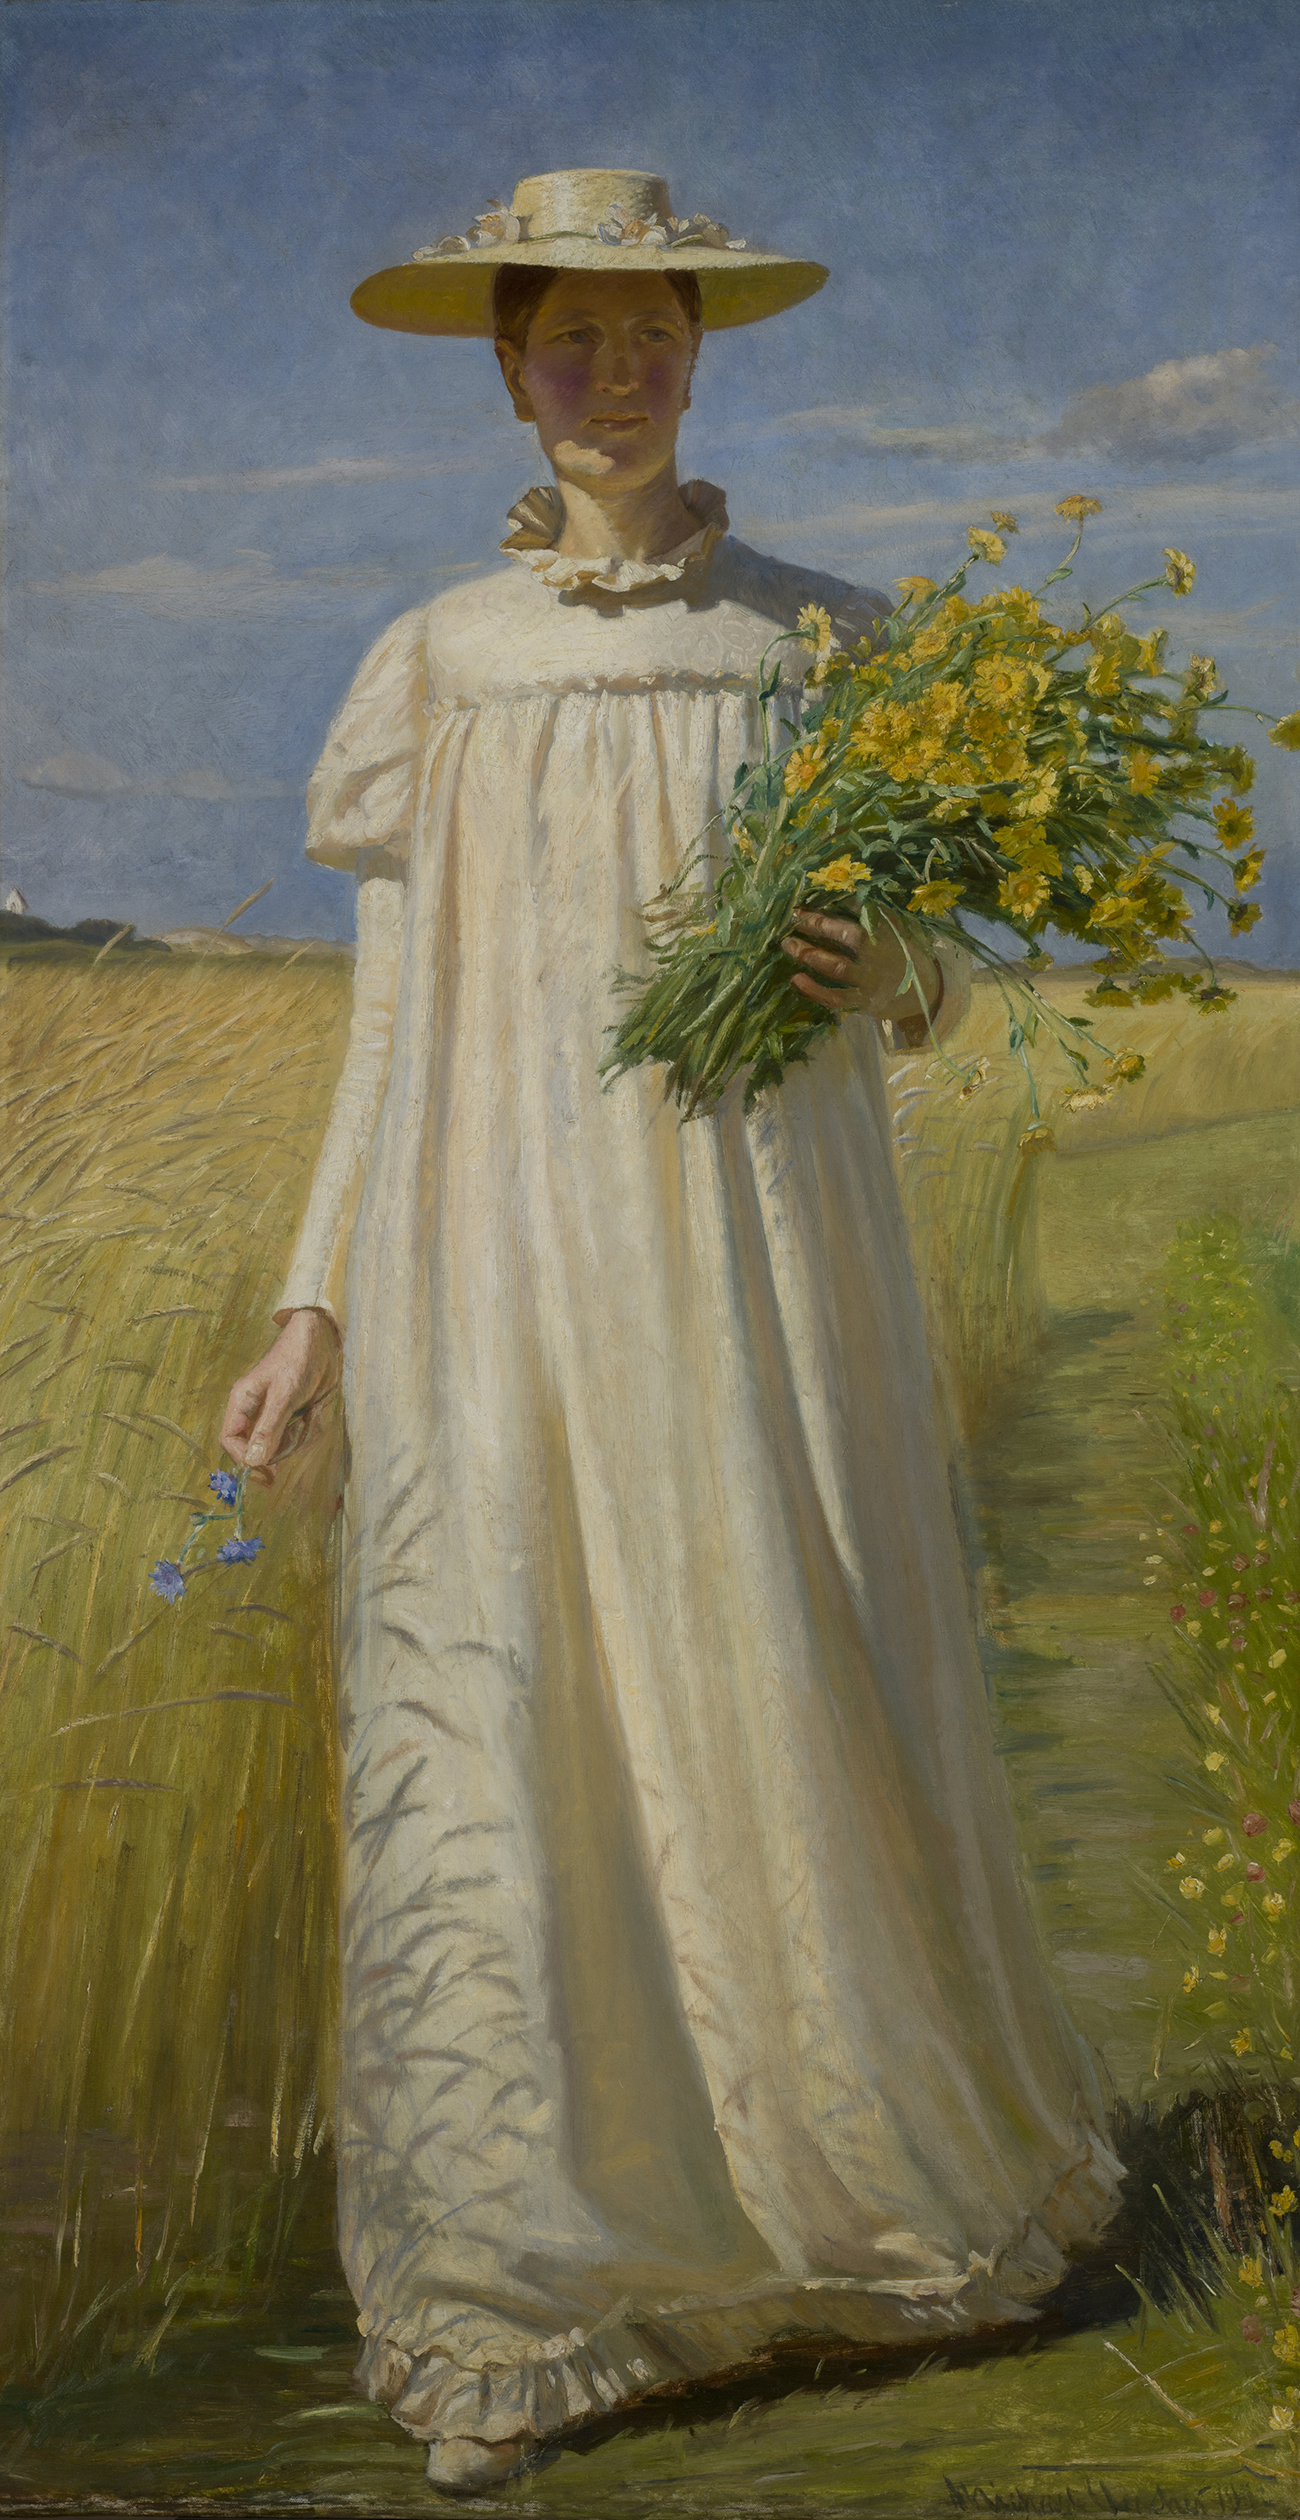 Anna Ancher Returning From The Field by Michael Ancher - 1902 - 64 x 55 cm Skagens Kunstmuseer